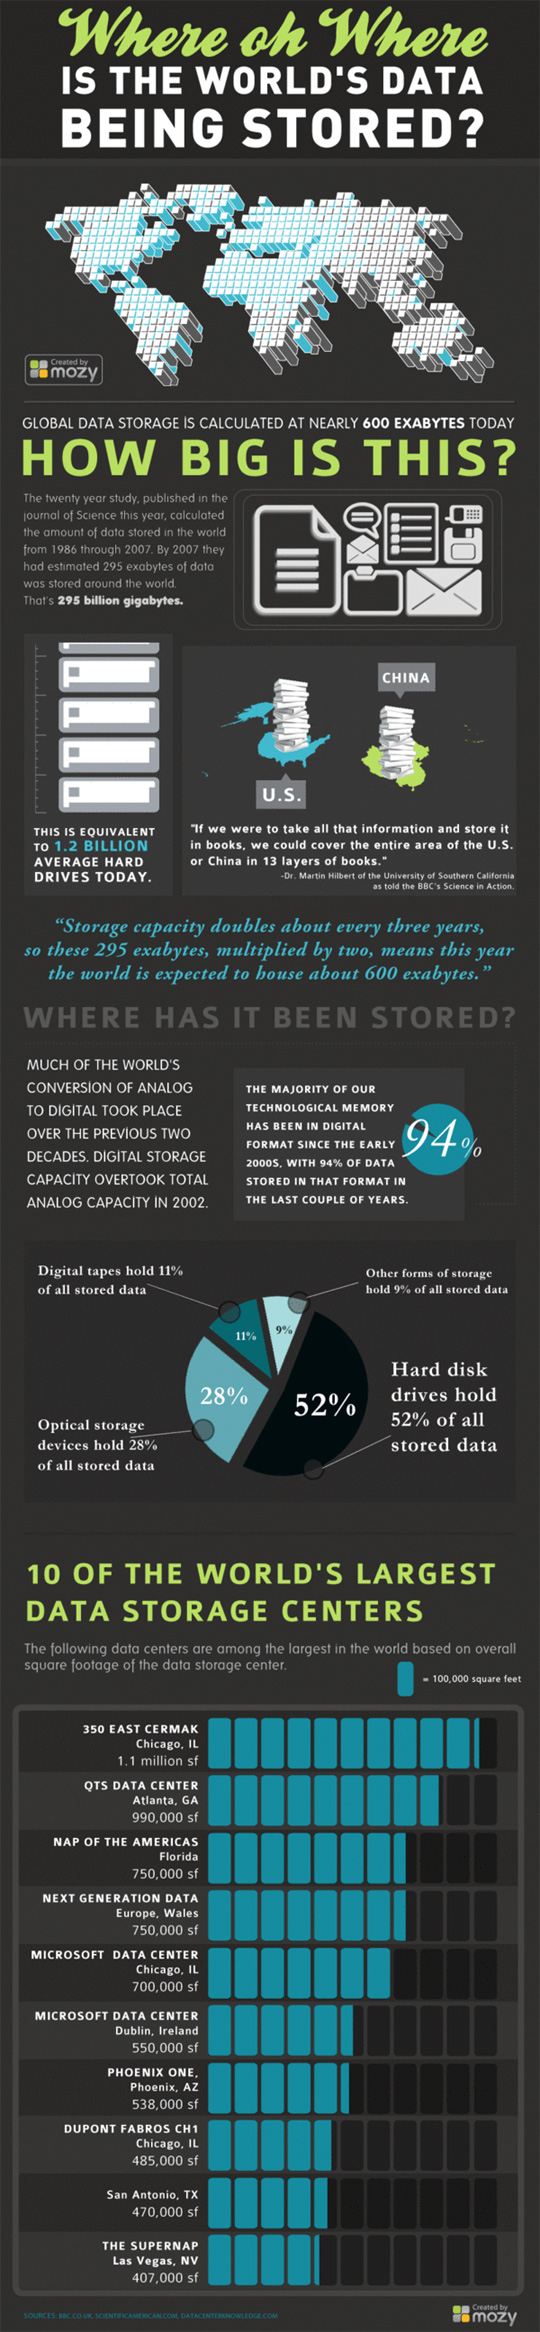 Where Oh Where: Current State Of World's Data Storage (Infographic) 1